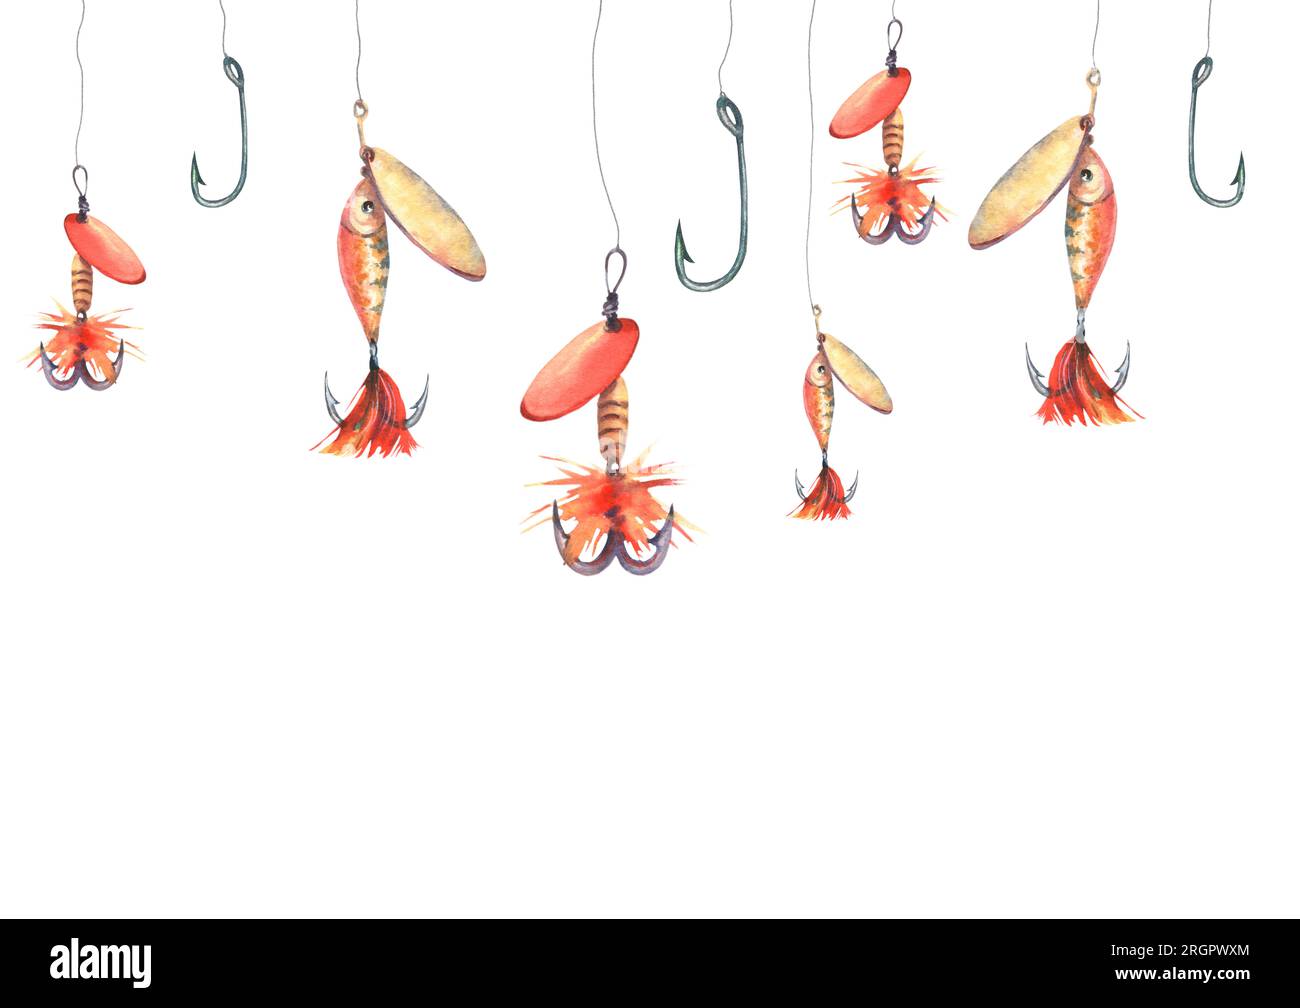 https://c8.alamy.com/comp/2RGPWXM/frame-with-fishing-tackle-hooks-and-lures-watercolor-illustration-on-white-background-for-business-design-packaging-of-fishing-tackle-postcards-2RGPWXM.jpg